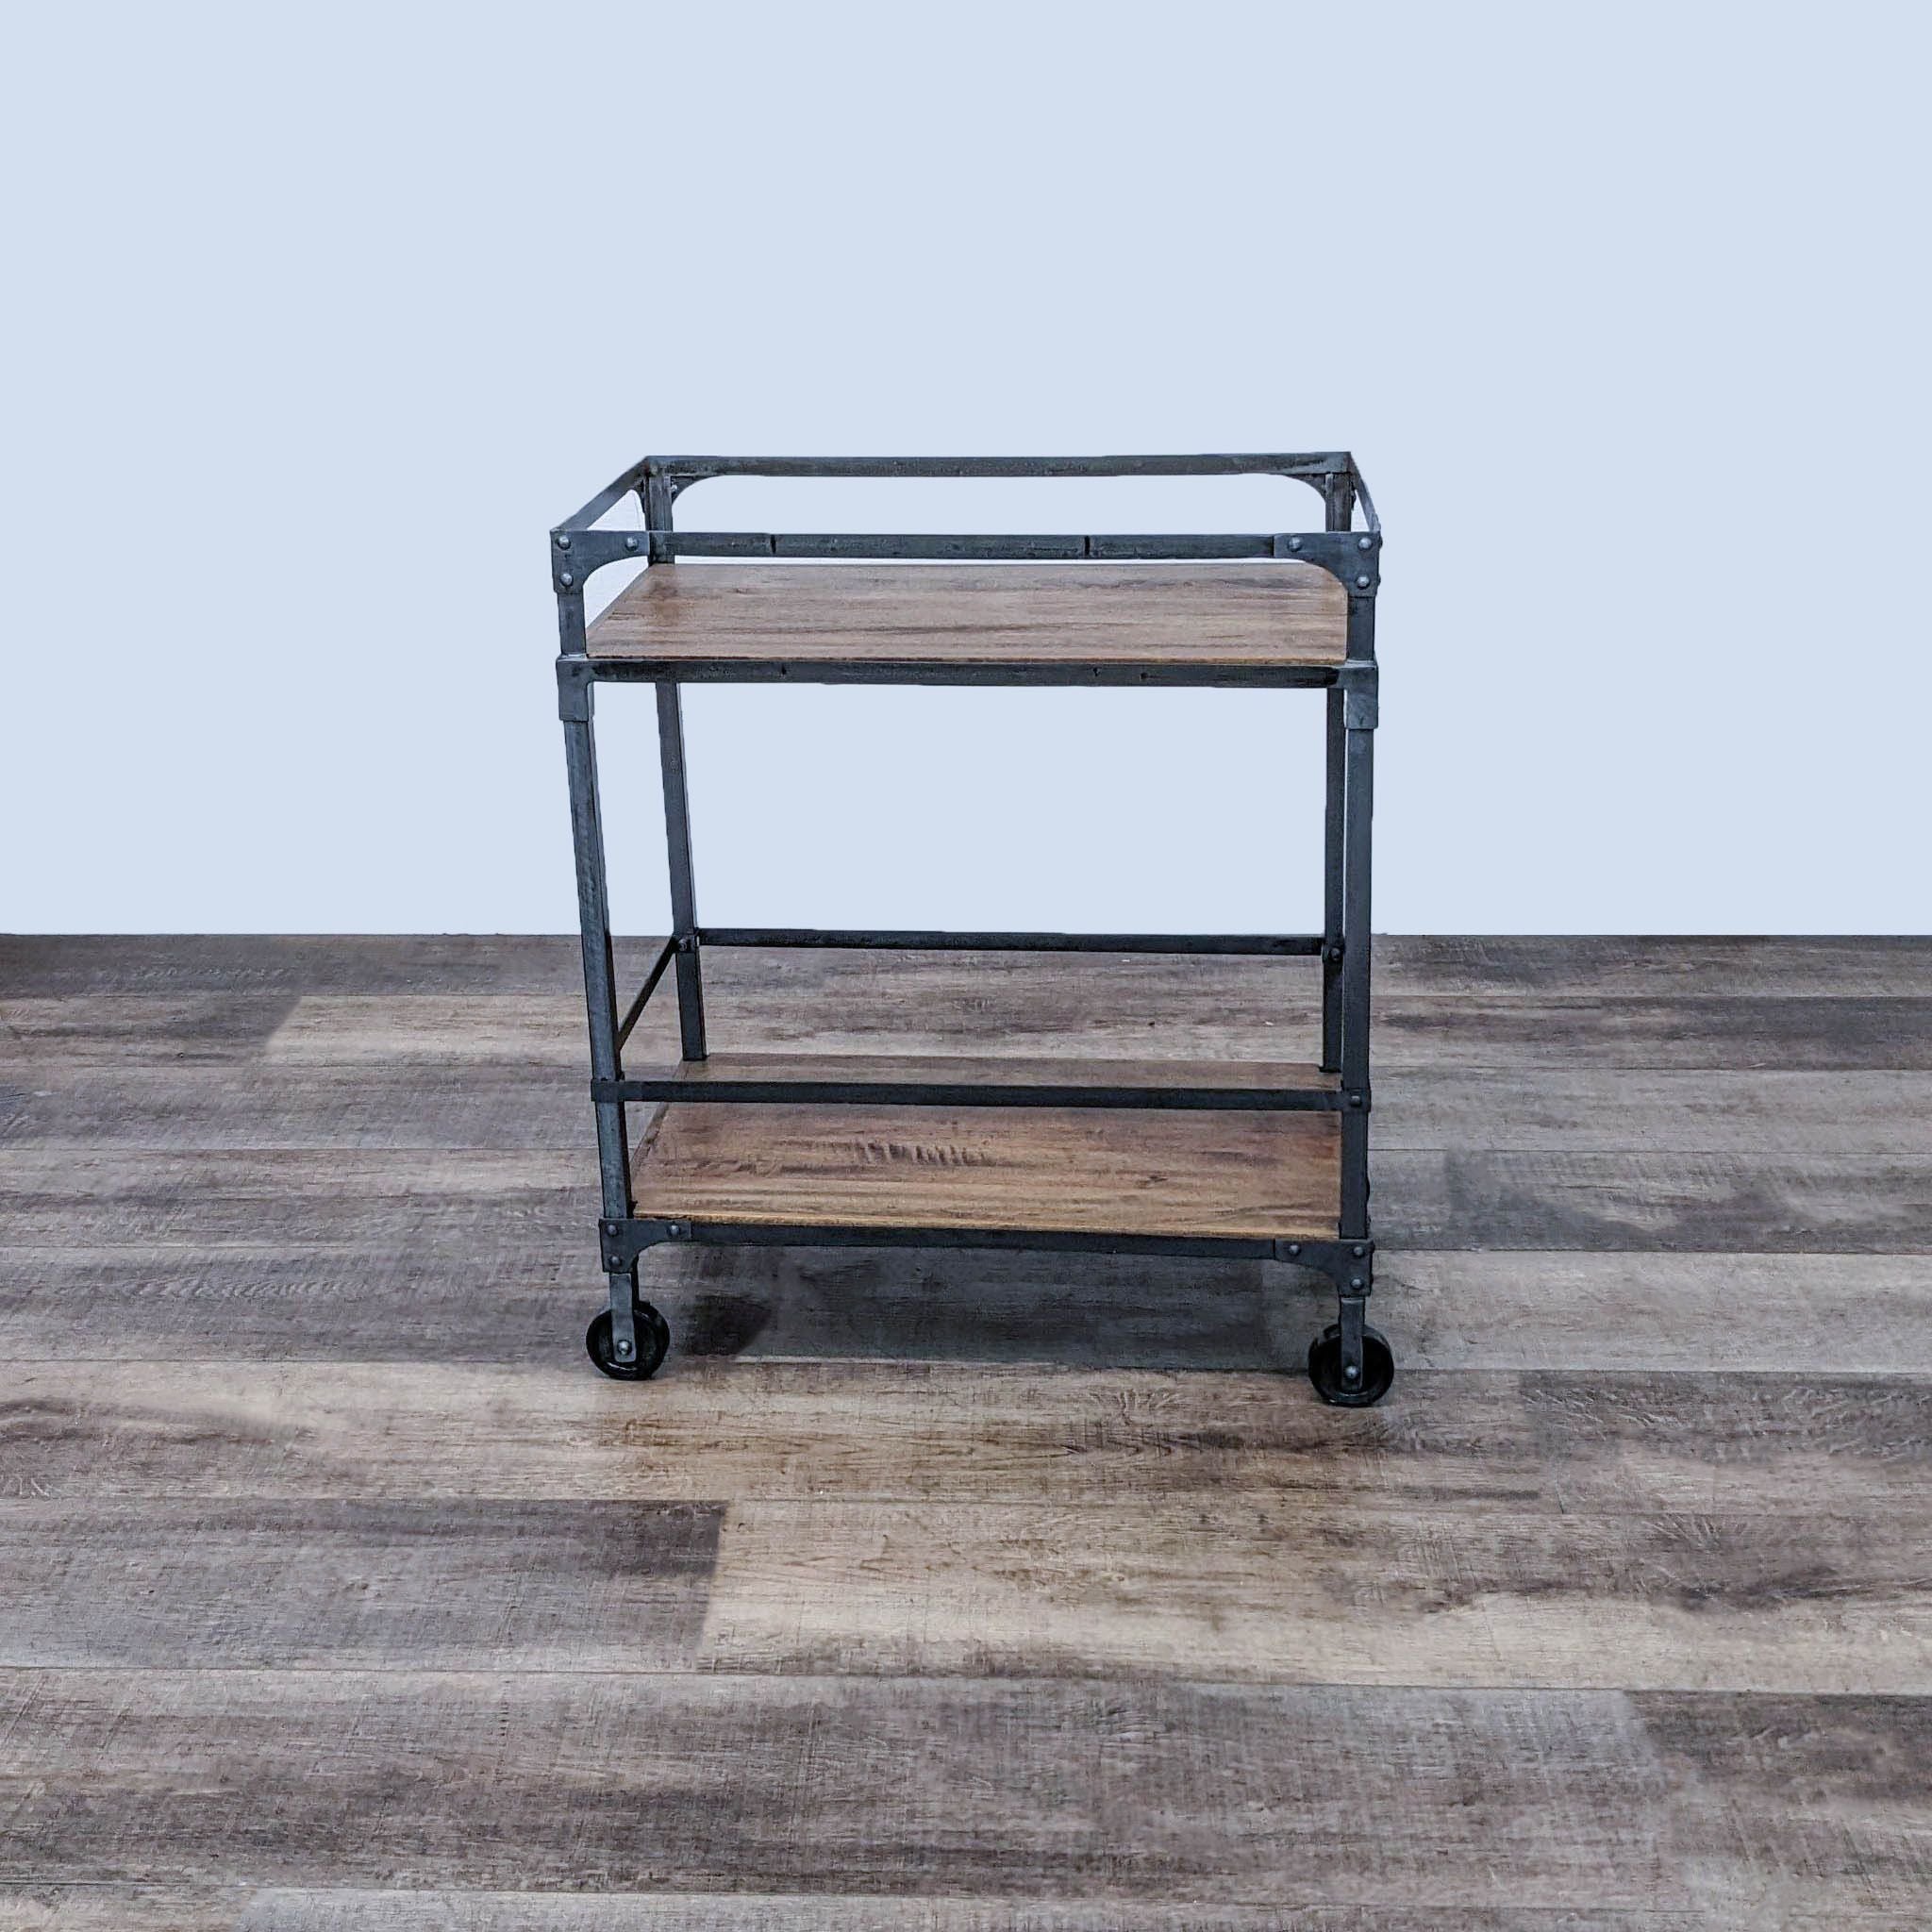 Cost Plus metal-framed cart with two wooden shelves on wheels, shown from the side, against a wood floor background.